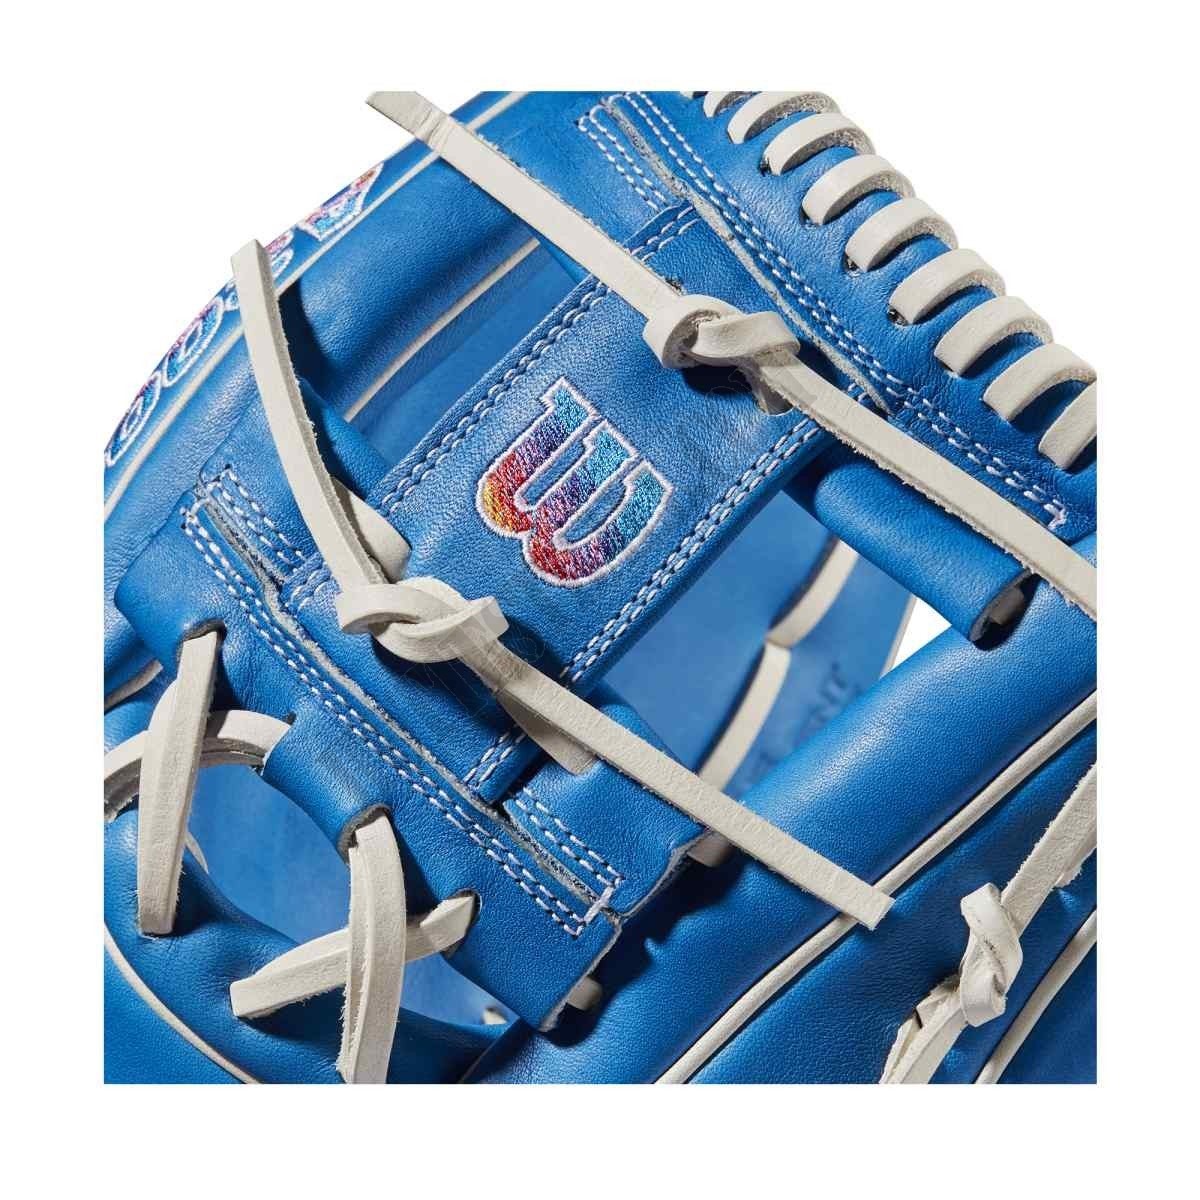 2022 Autism Speaks A2000 1786 11.5" Infield Baseball Glove - Limited Edition ● Wilson Promotions - -5